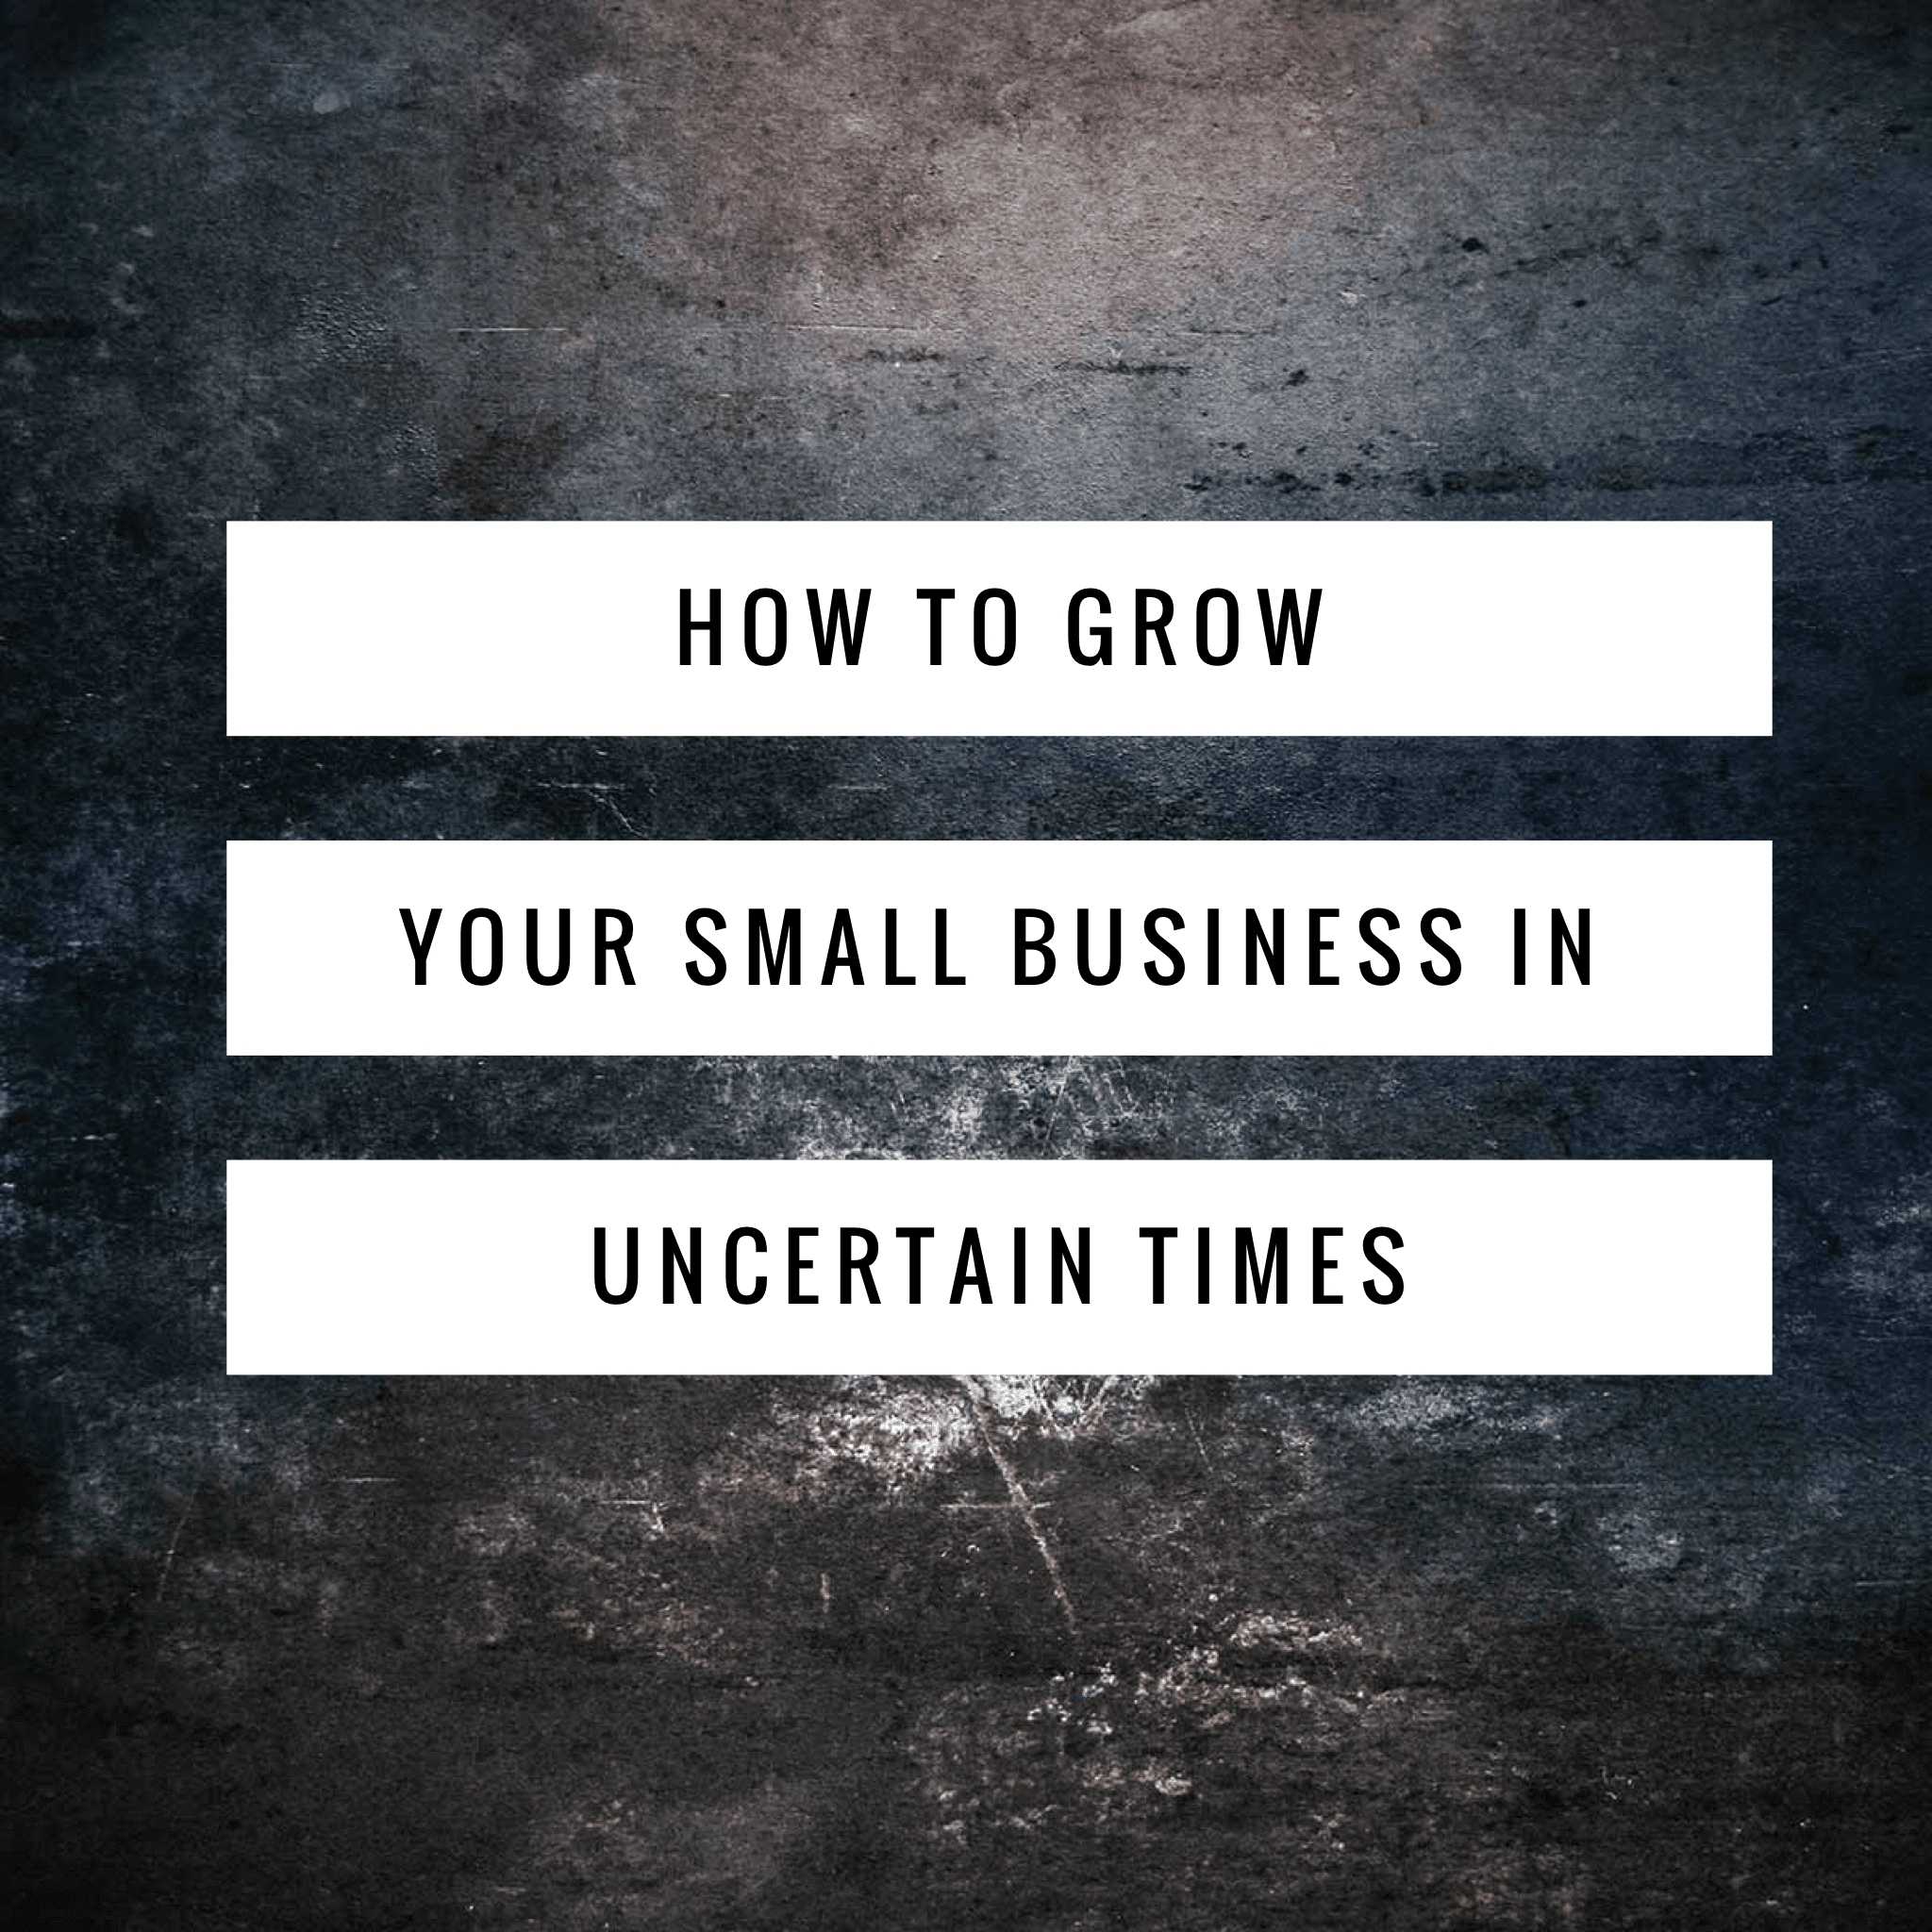 How To Grow Your Small Business In Uncertain Economic Times